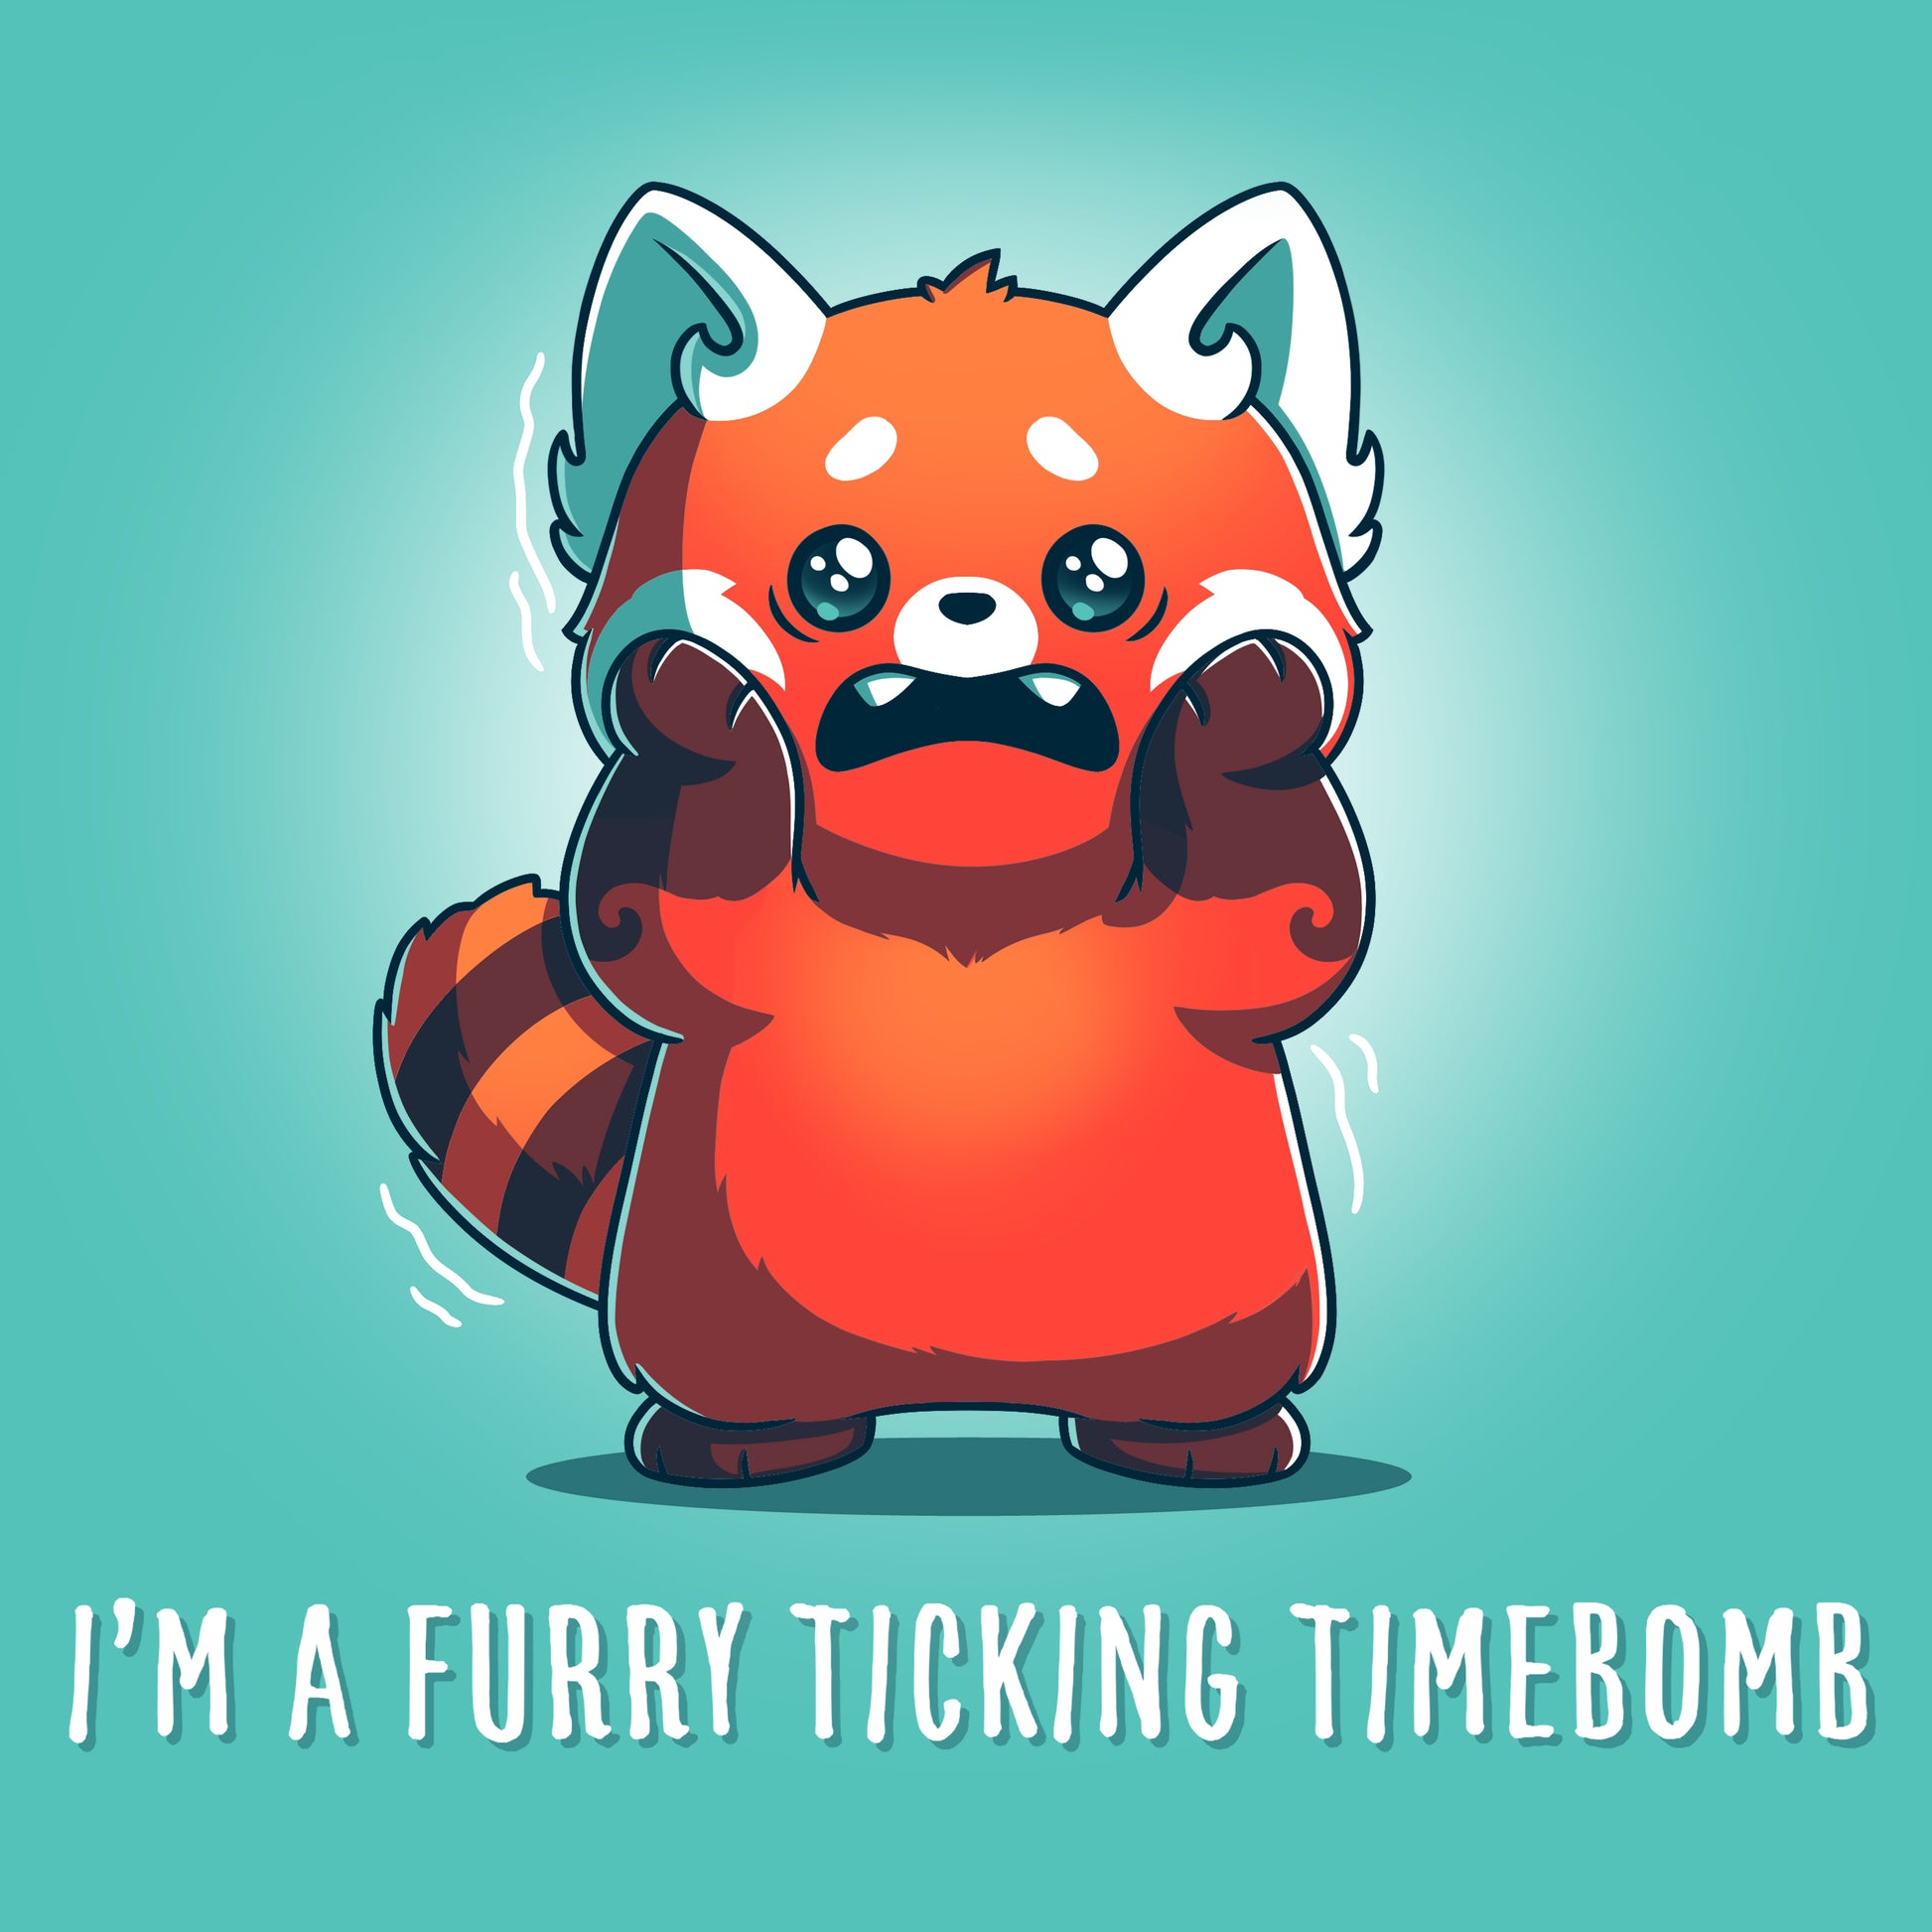 I'm a Furry Ticking Timebomb, a Pixar Disney character on the verge of "Turning Red".